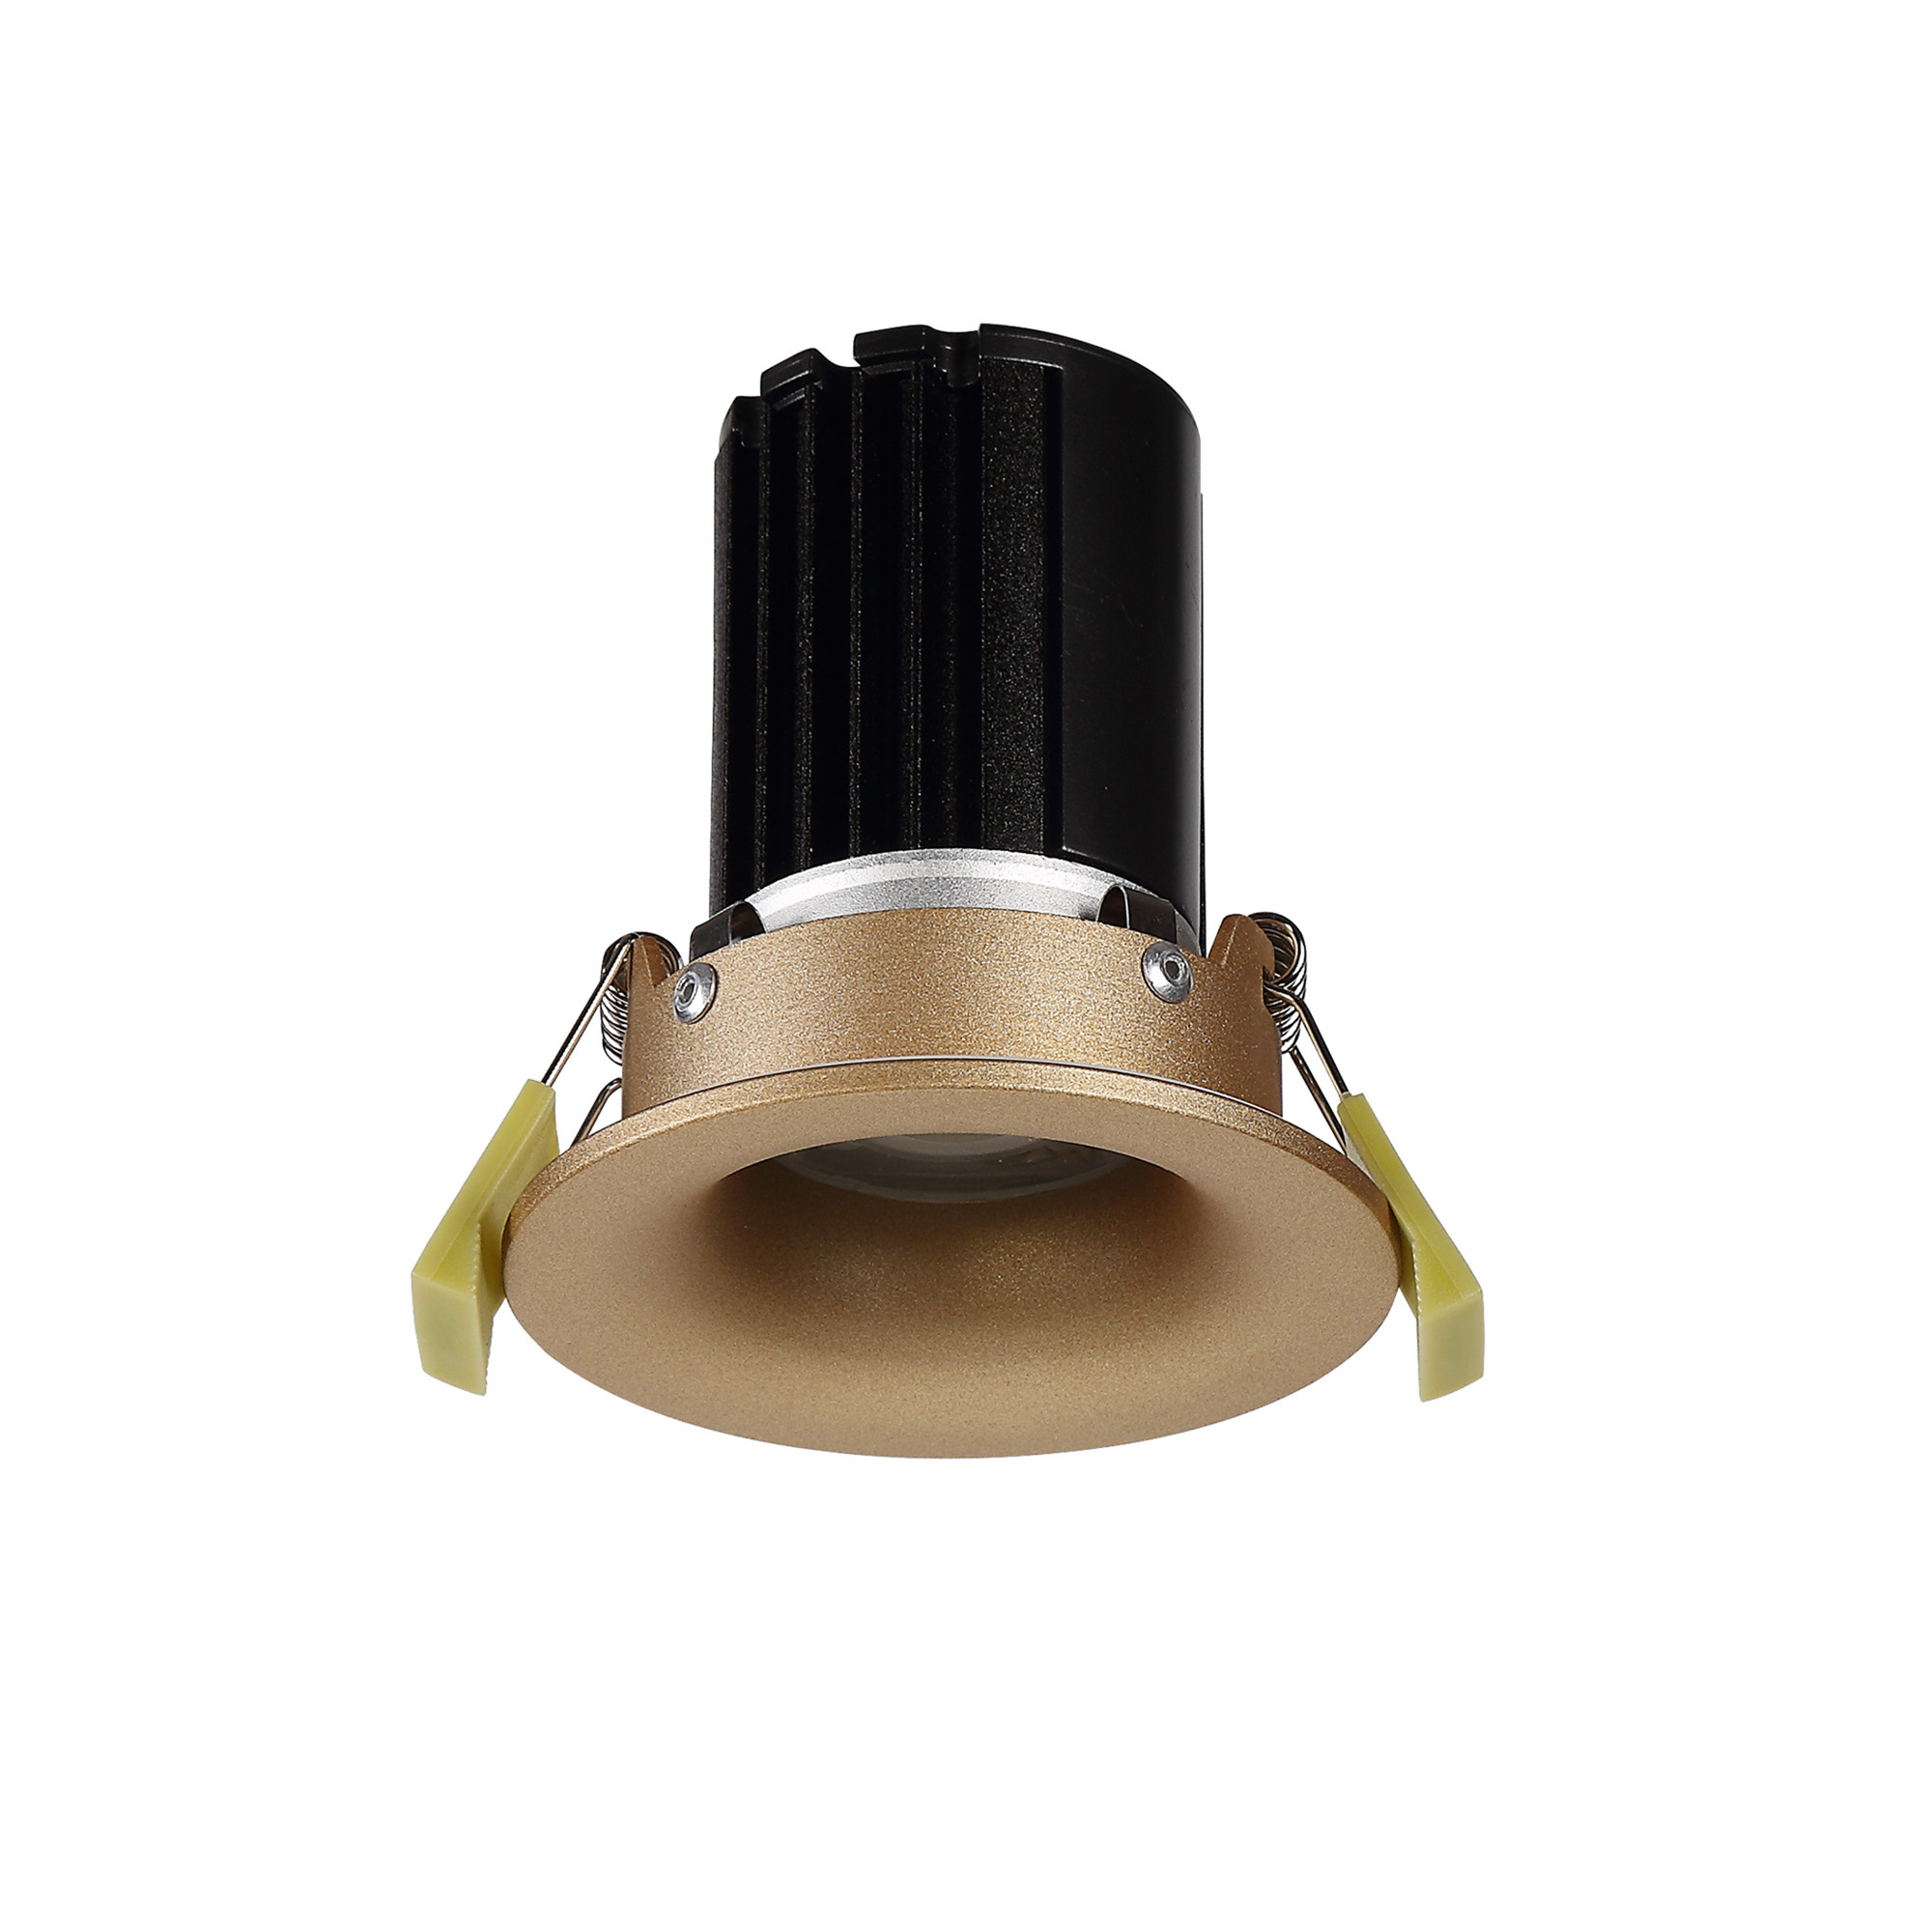 DM200799  Bruve 10 Tridonic powered 10W 2700K 750lm 12° CRI>90 LED Engine Champagne Gold Fixed Round Recessed Downlight, Inner Glass cover, IP65